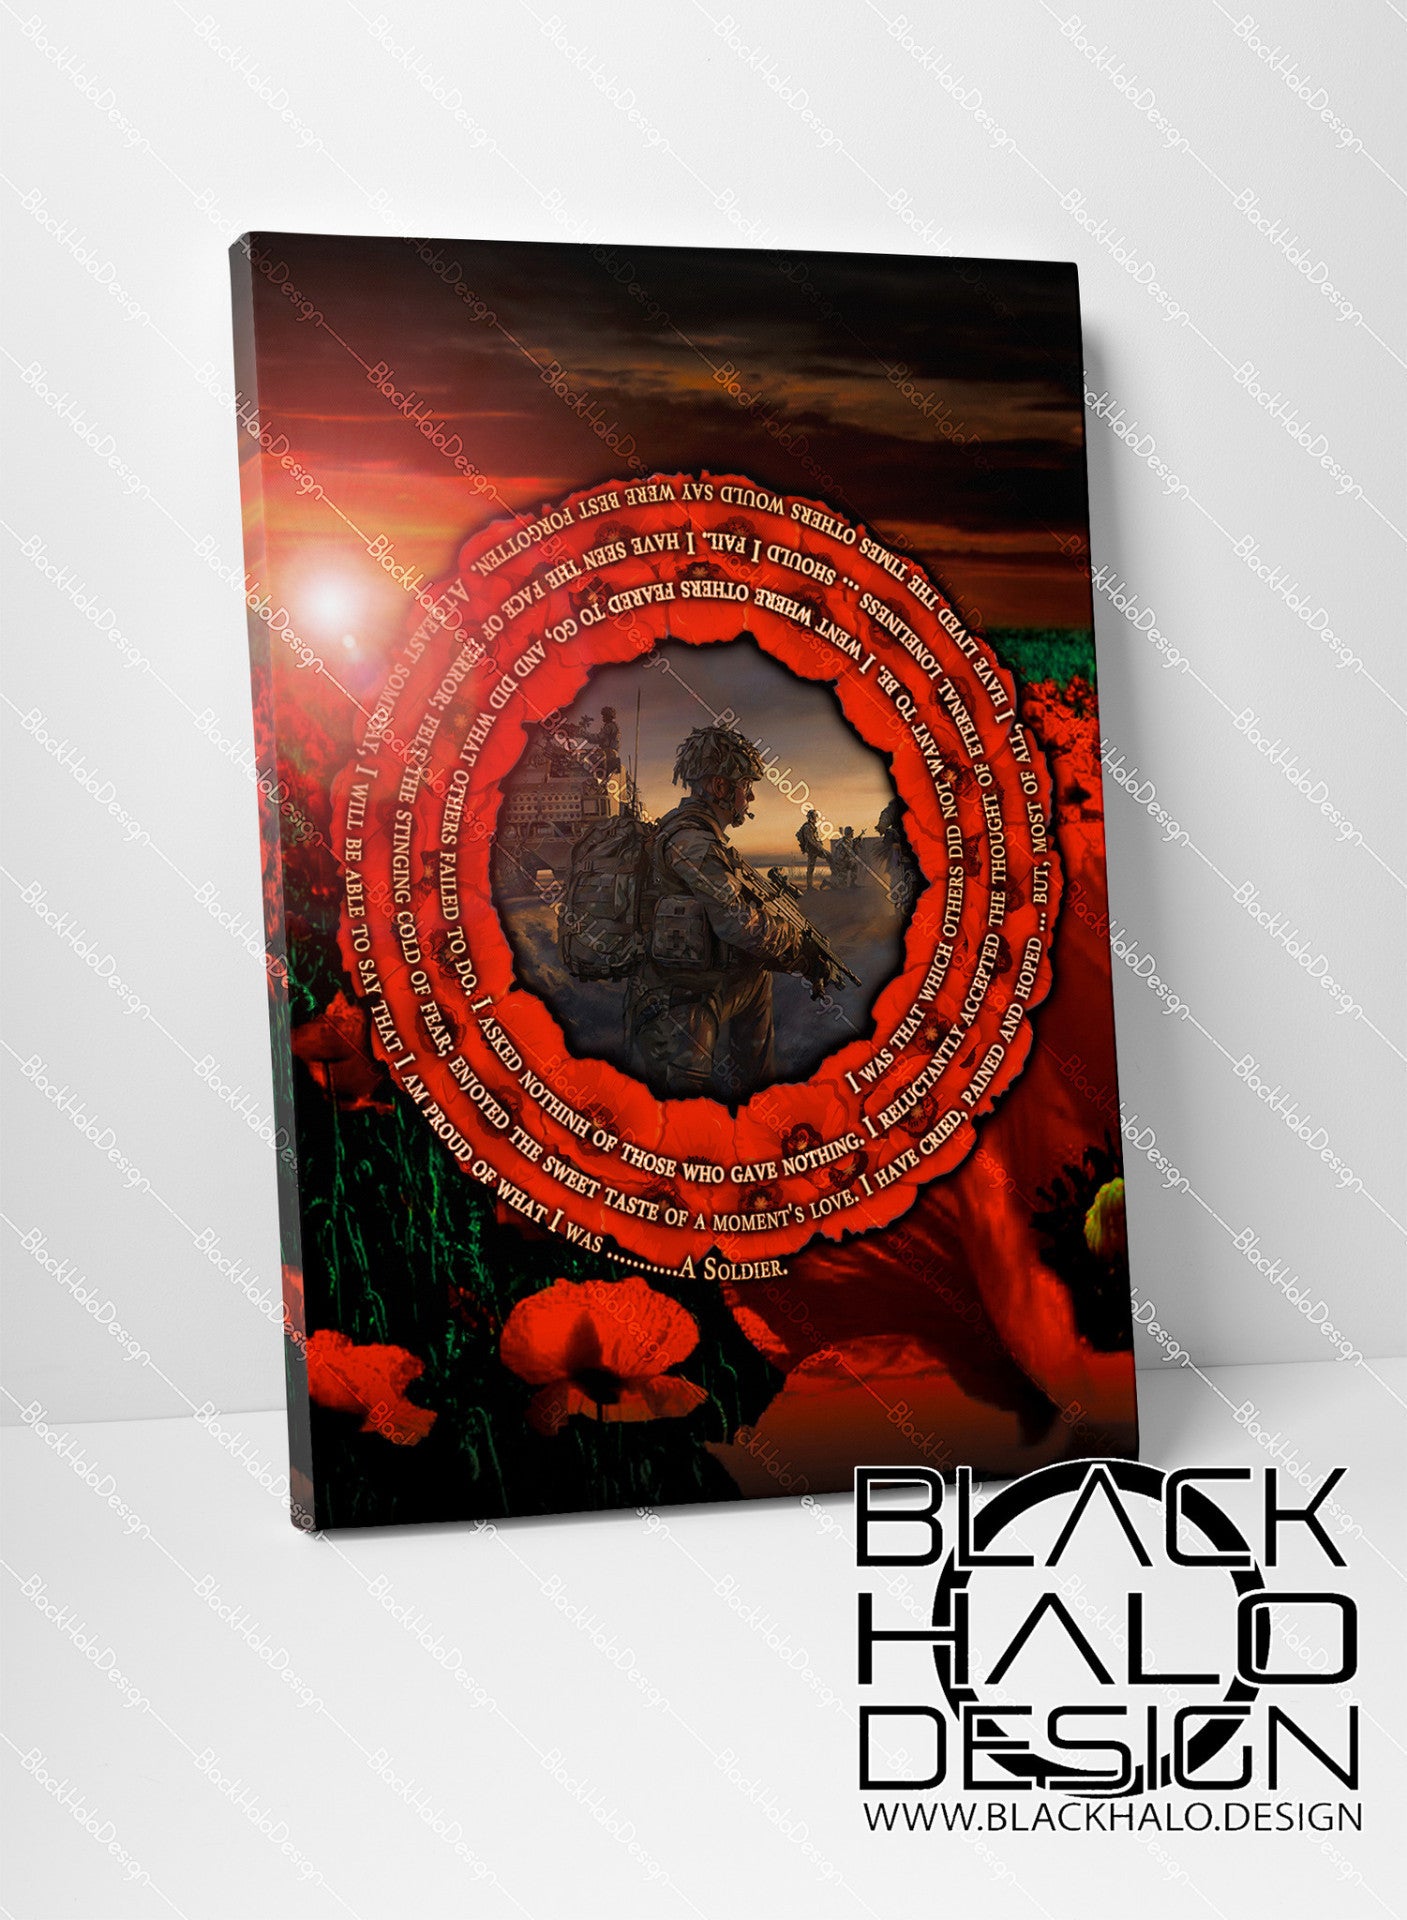 Requested Grace Box Framed Canvas 750mm x 1000mm - Black Halo Design
 - 1